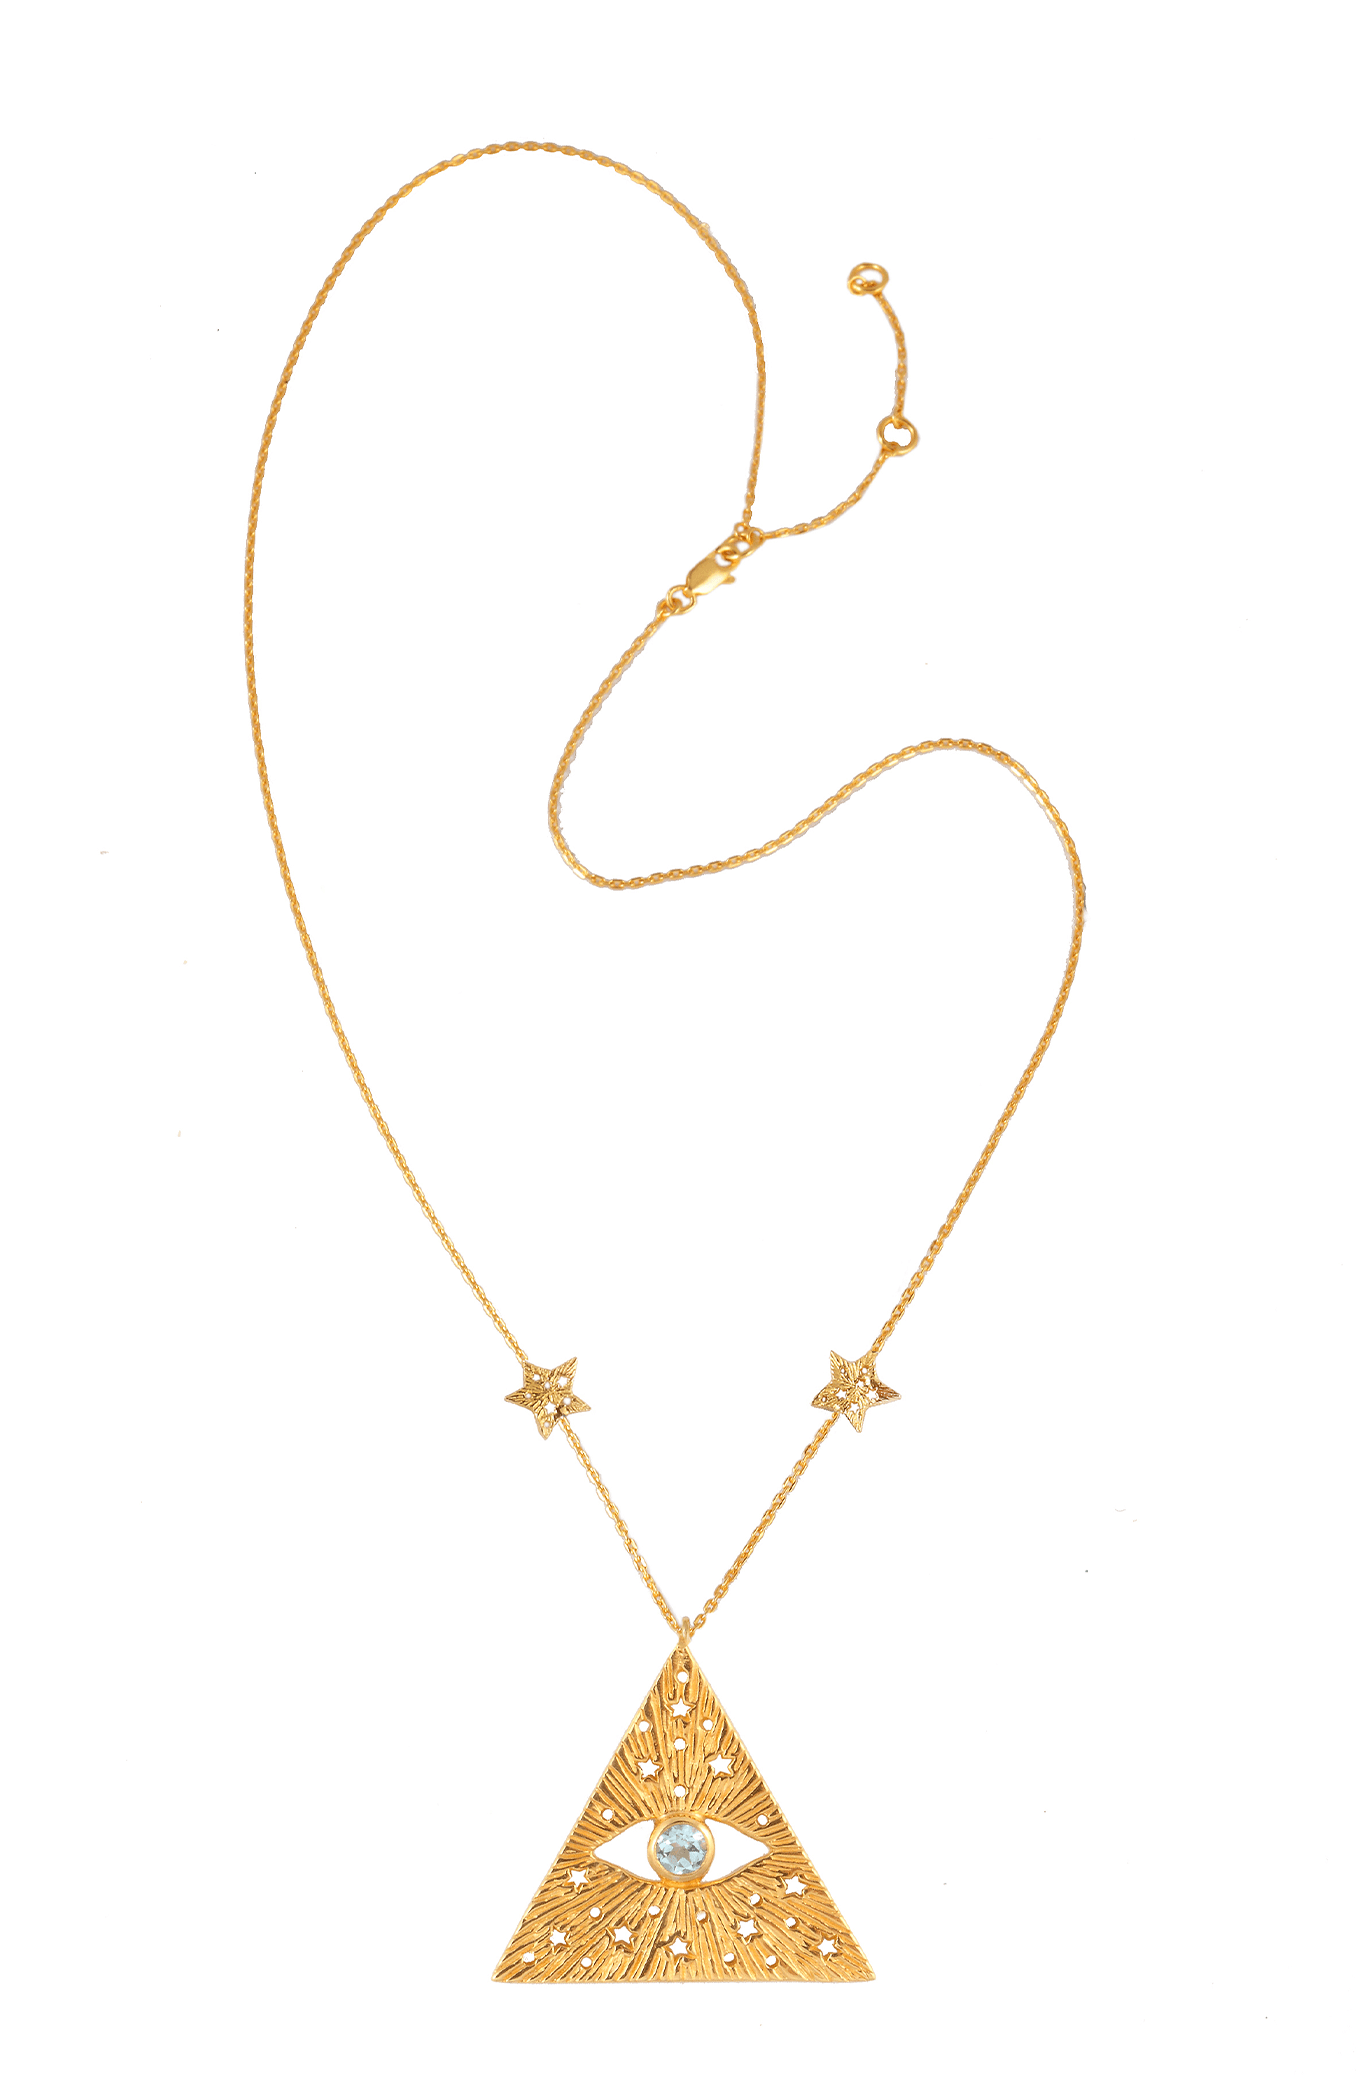 All-seen-eye necklace with 2 stars on the chain. Gold plated